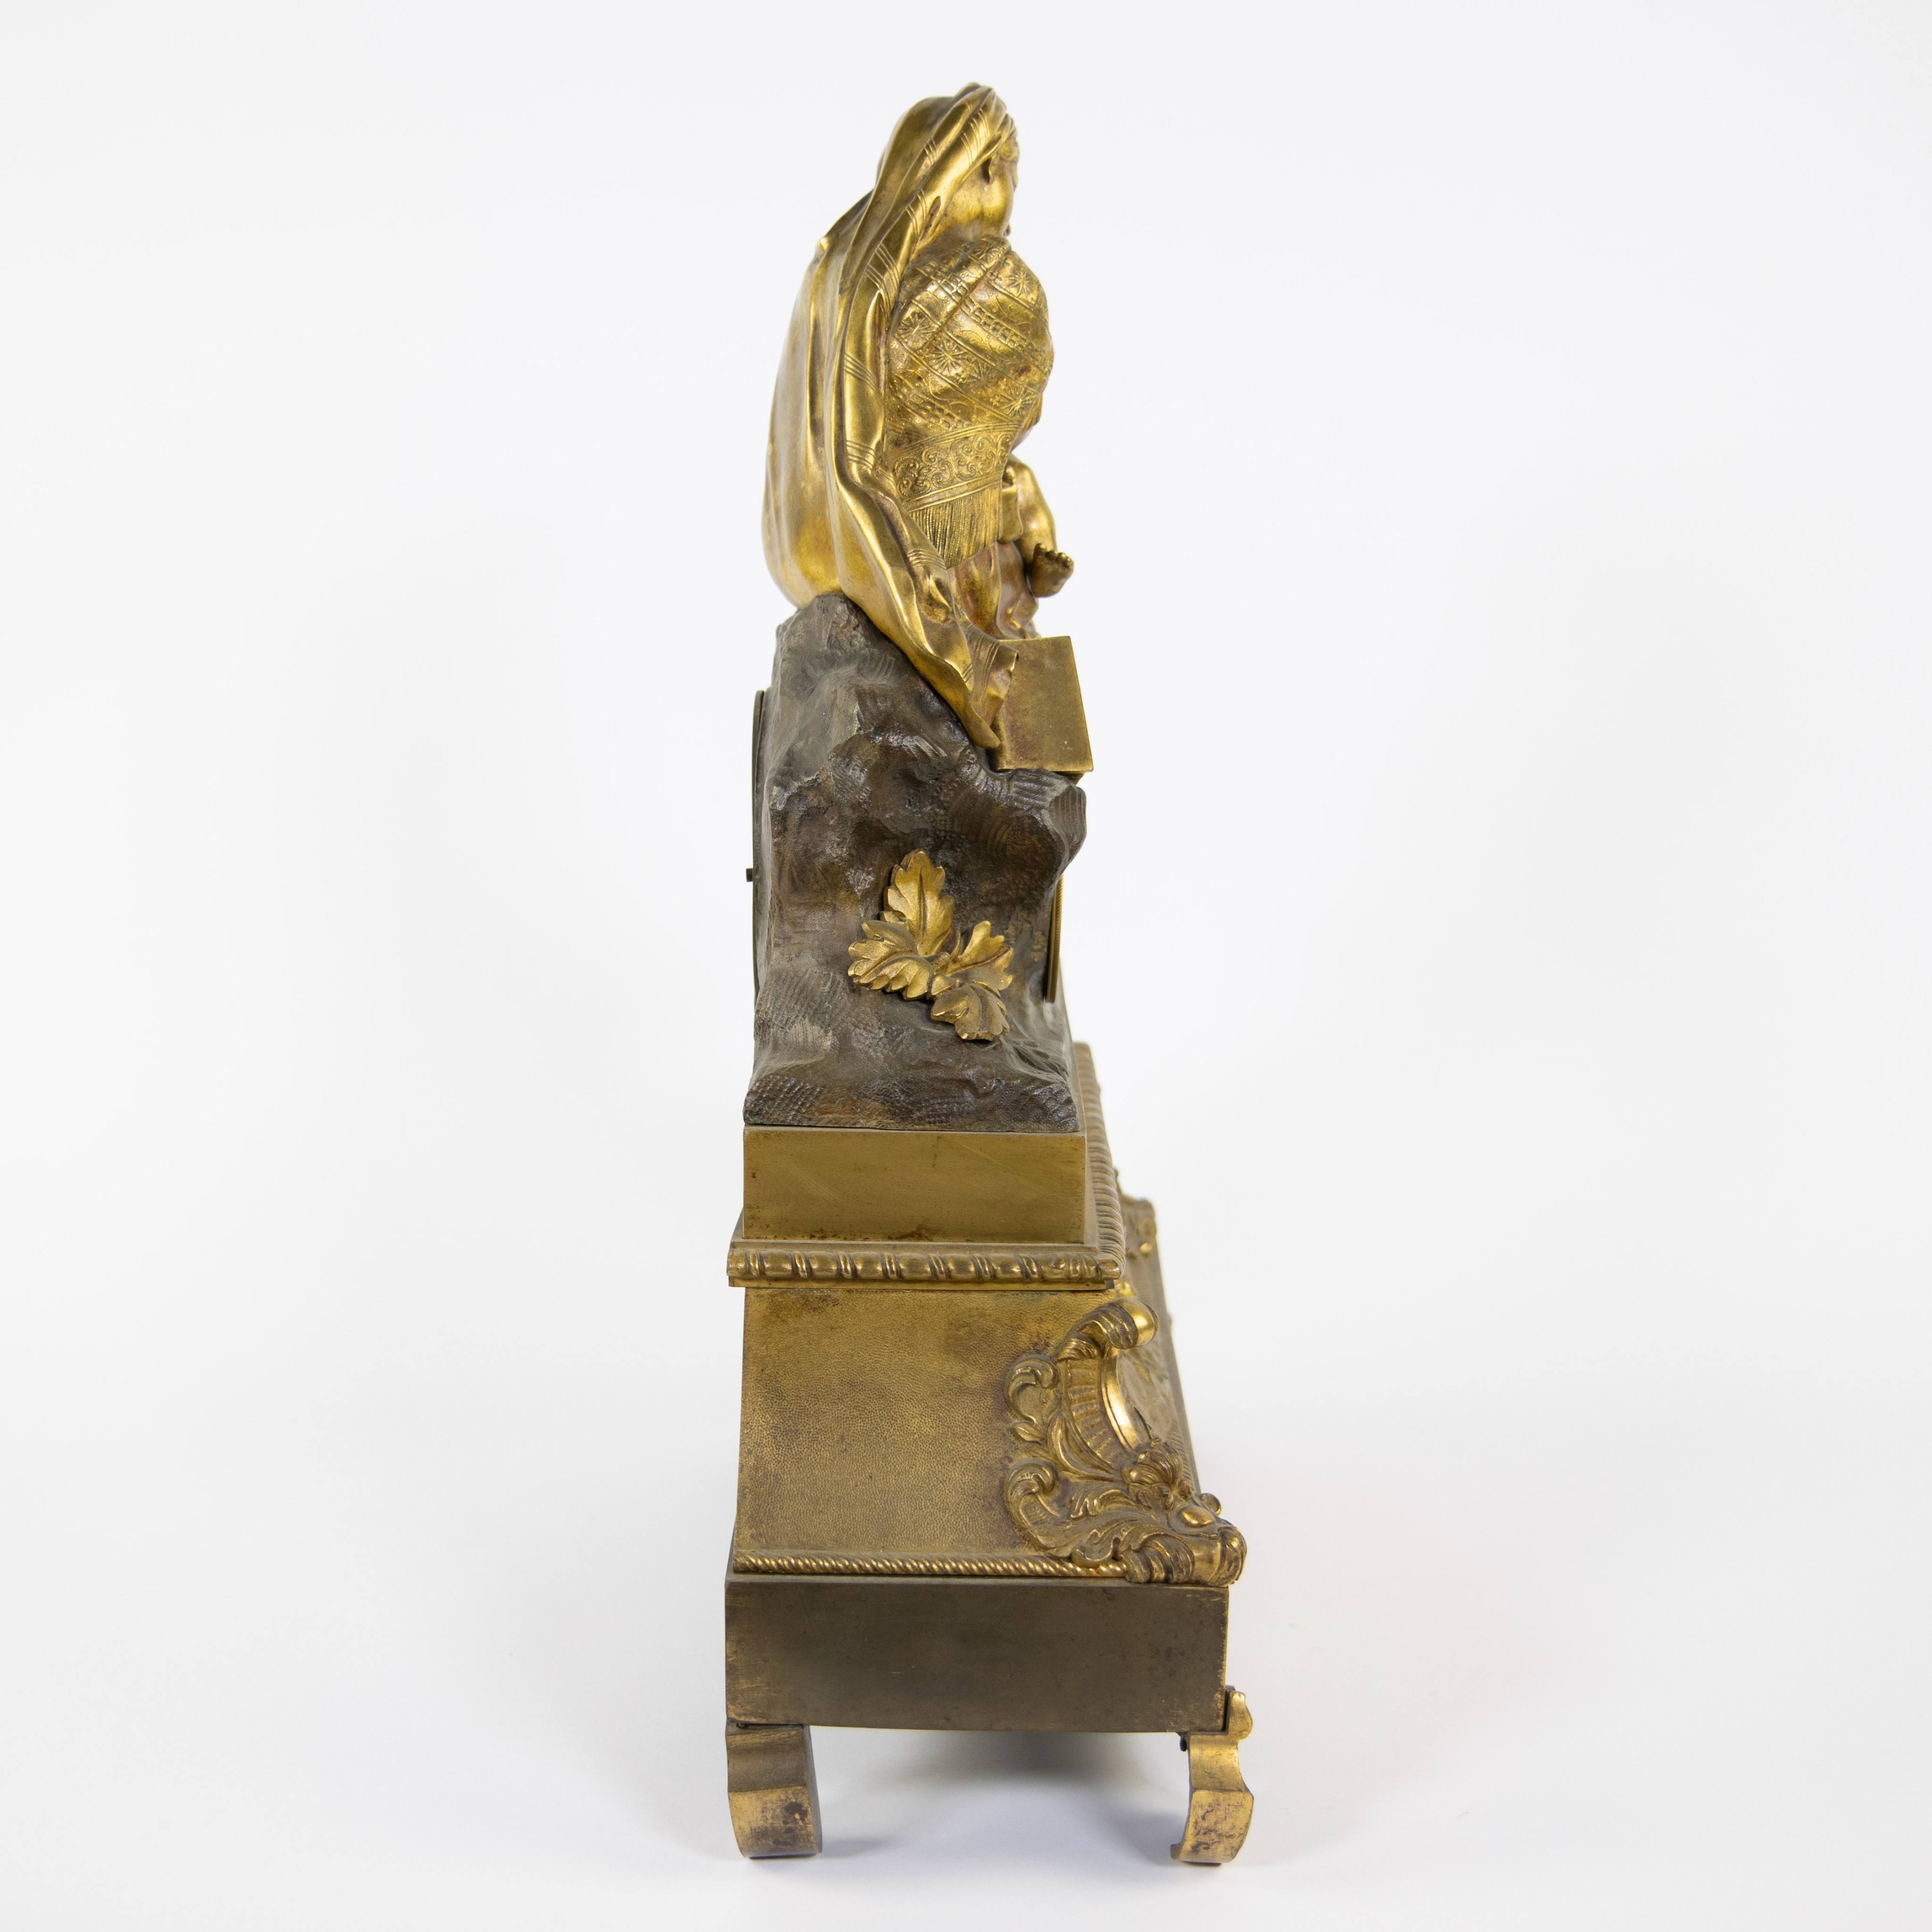 Gilt bronze Louis Philippe mantel clock with mother and child decor, Paris 19th century - Image 5 of 5